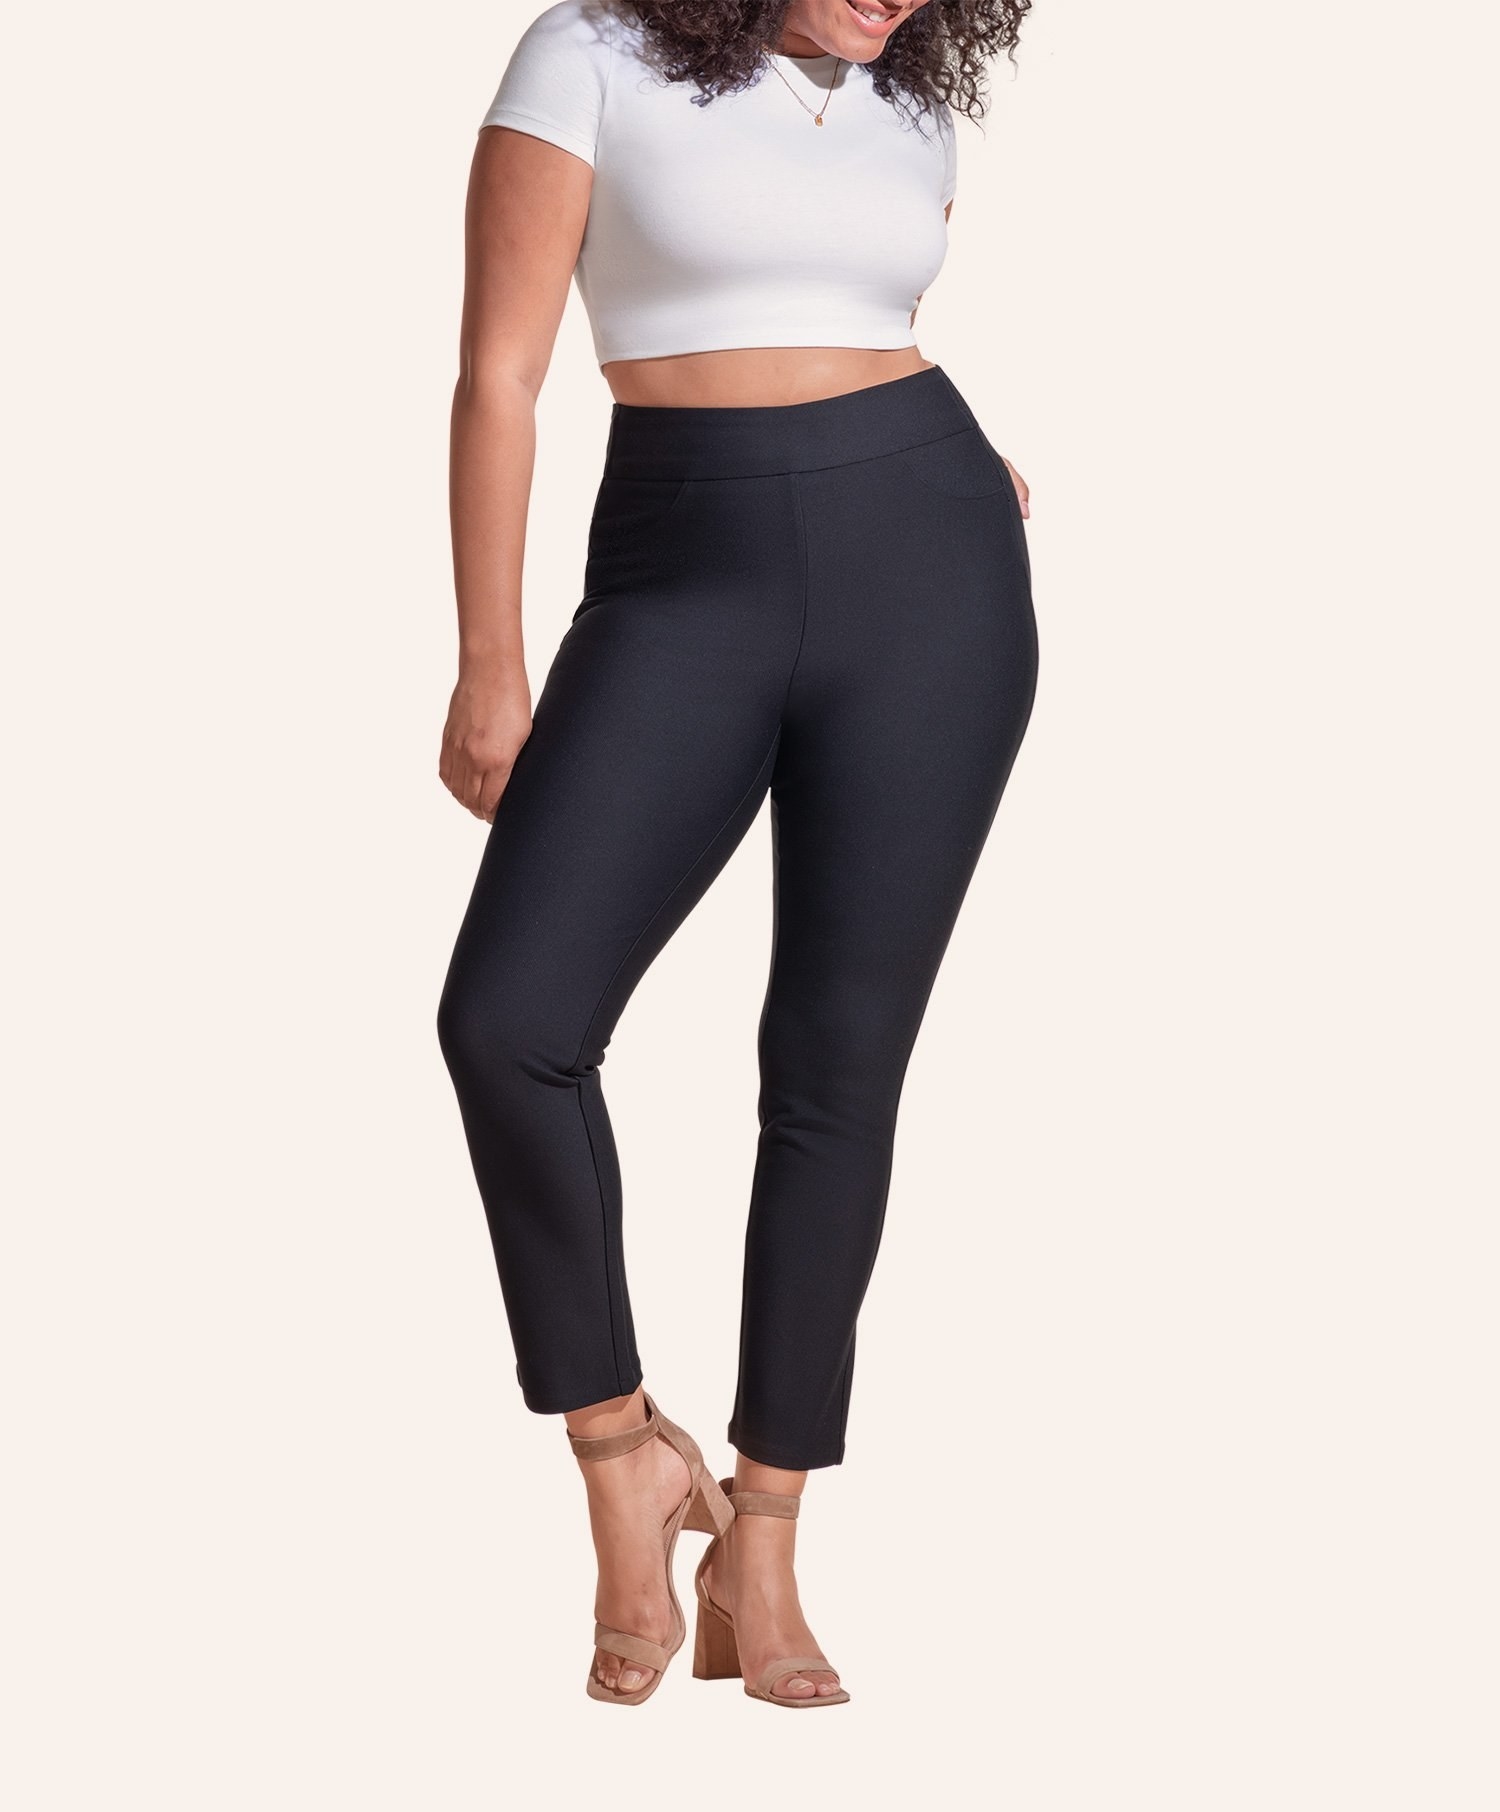 A model in the high waisted black pants